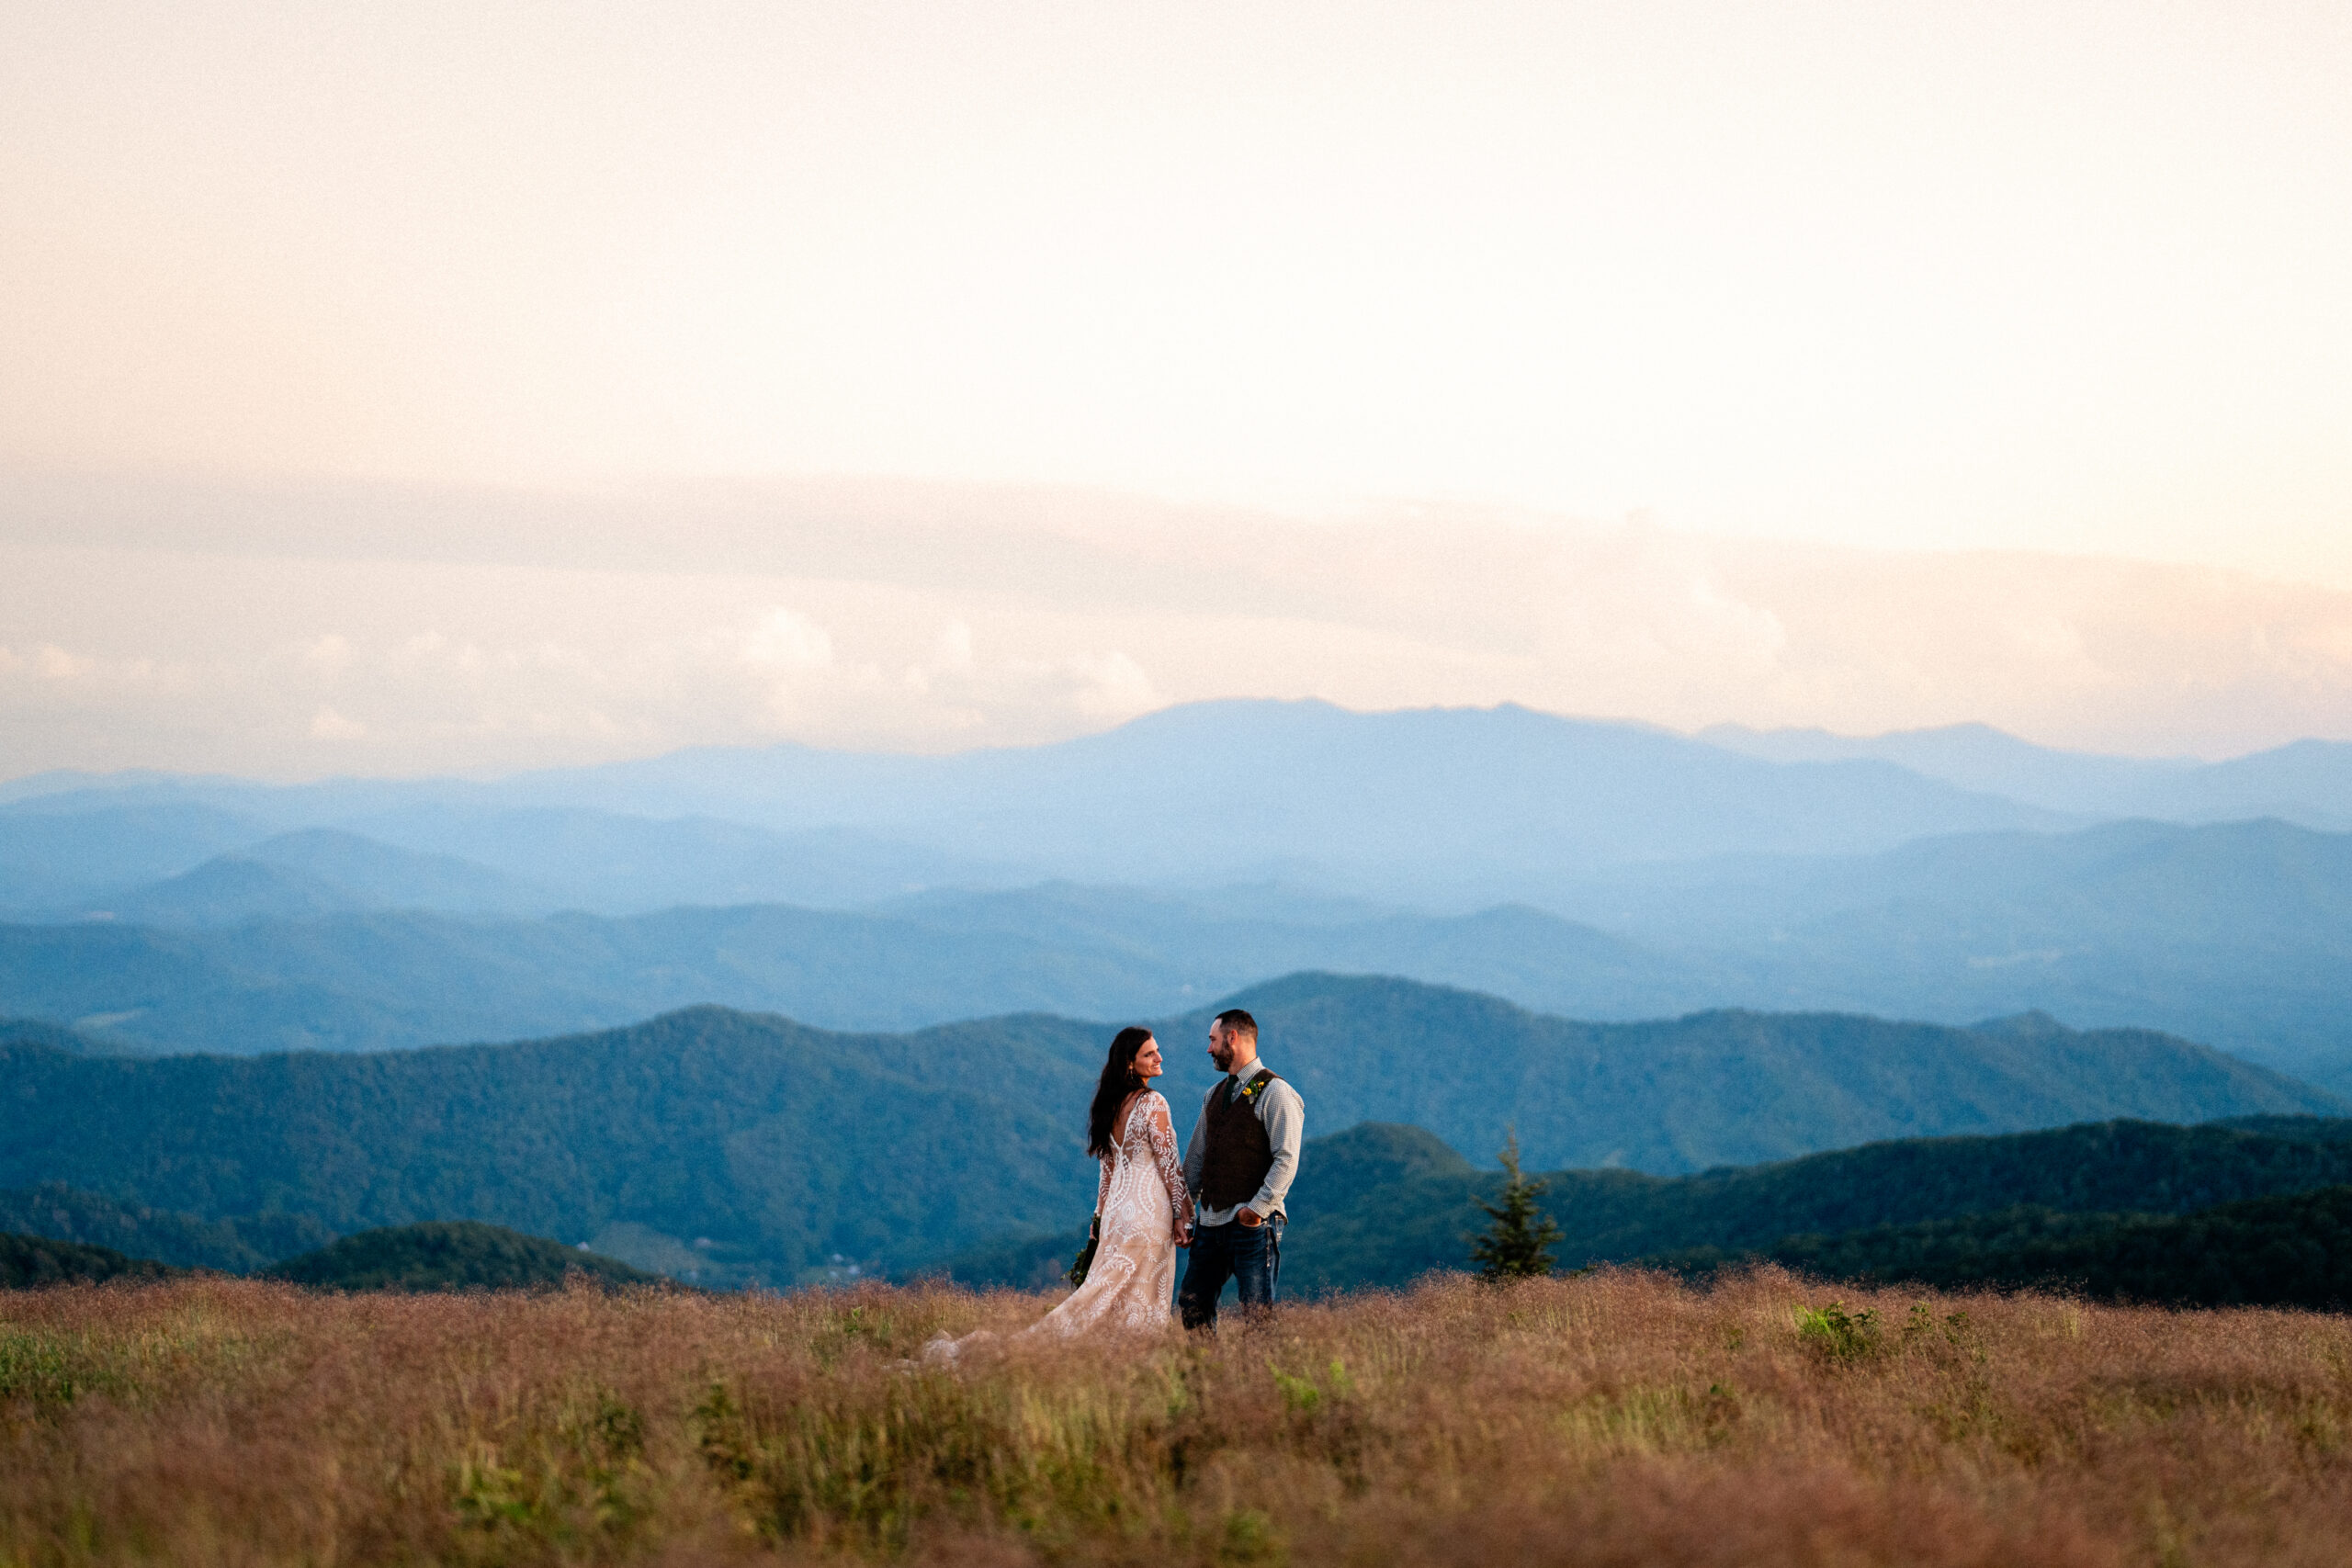 Bride and groom hold hands and stare into each others eyes while standing in a field with mountains in the background